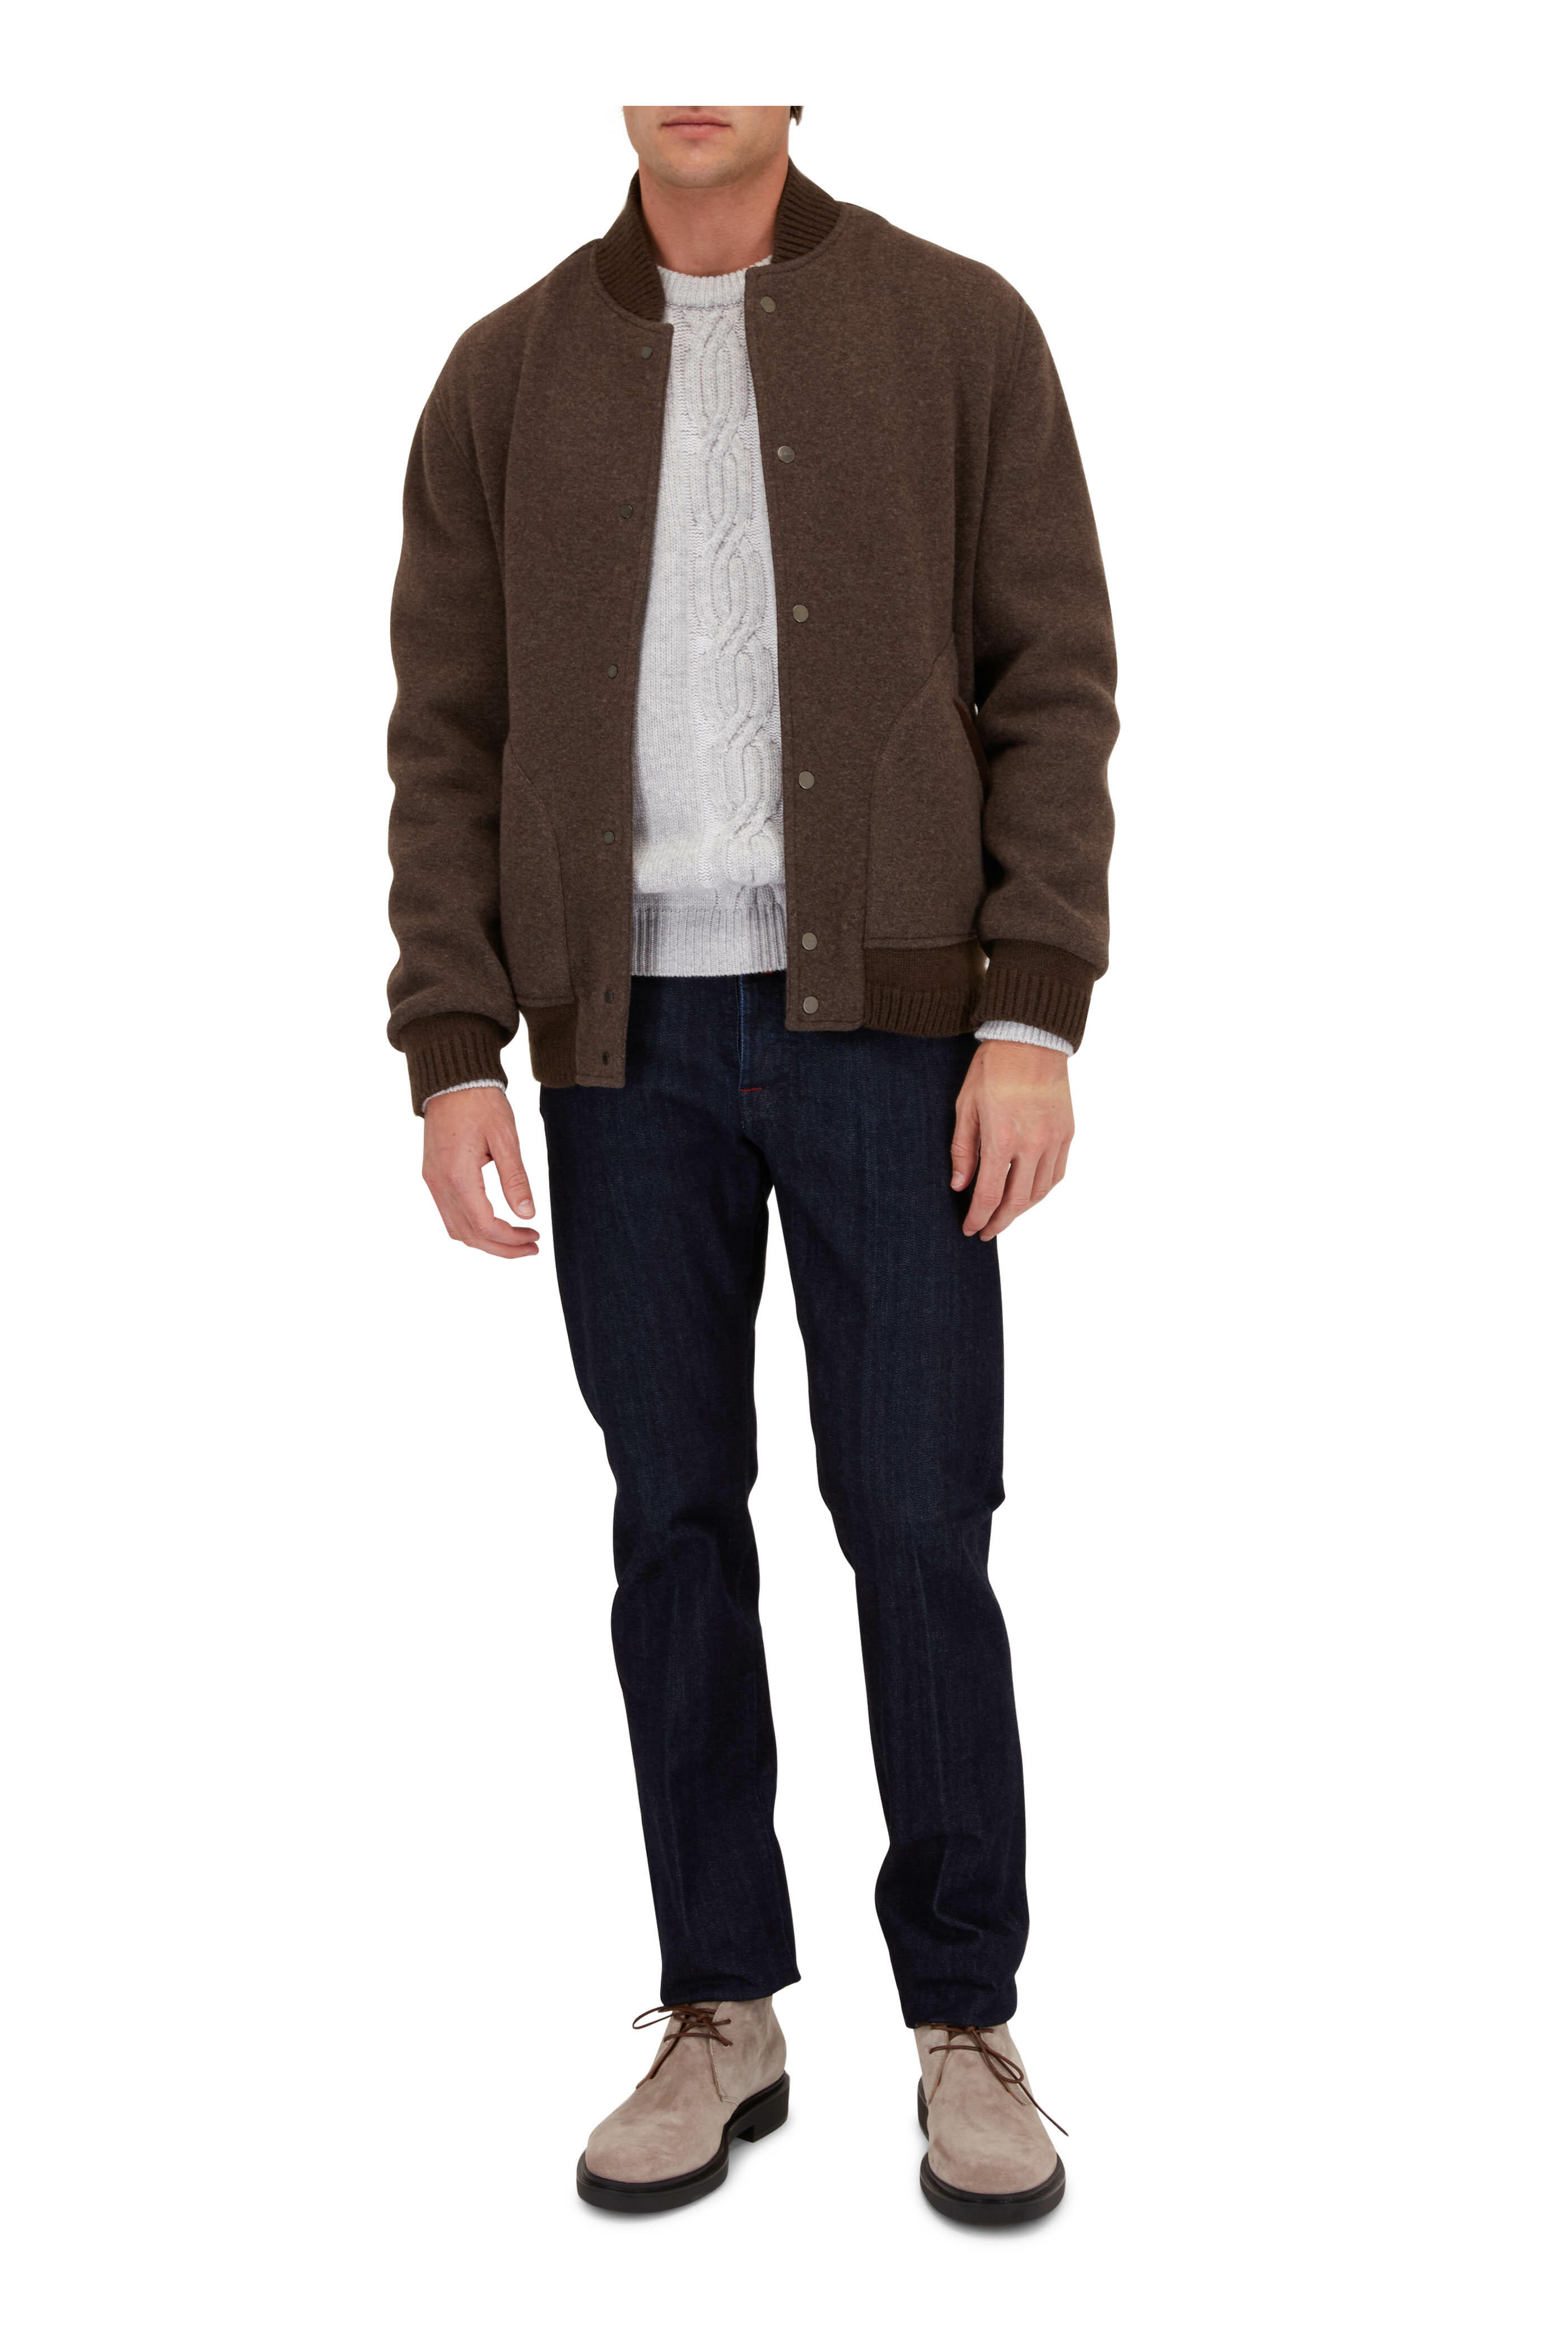 Kiton - Brown Knit Cashmere Bomber Jacket | Mitchell Stores